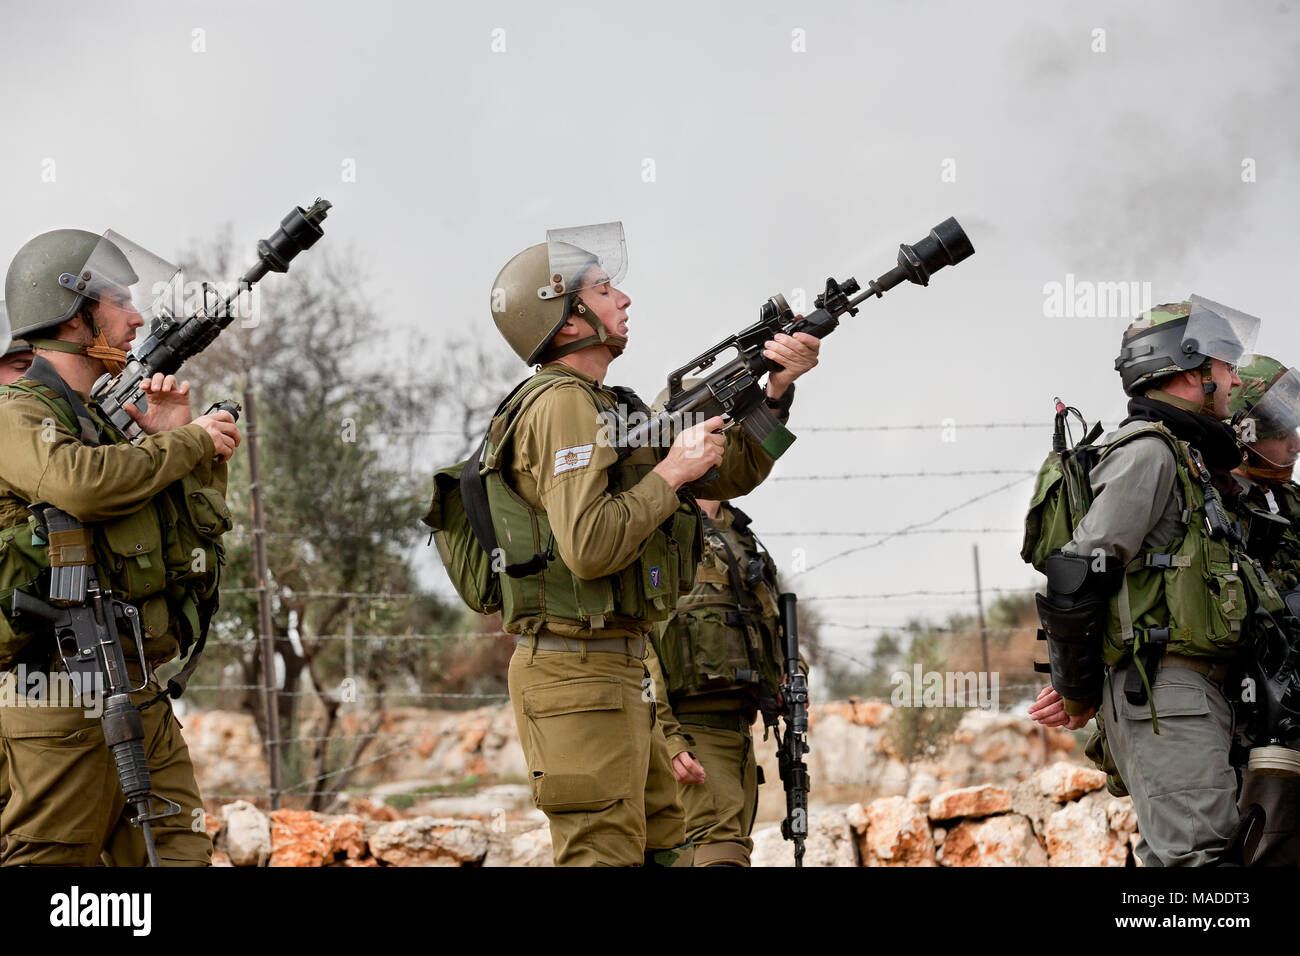 Bilin, Palestine, December 31, 2010: Israel Defence Force is shooting tear gas during weekly demonstrations against Palestinian land confiscation and  Stock Photo